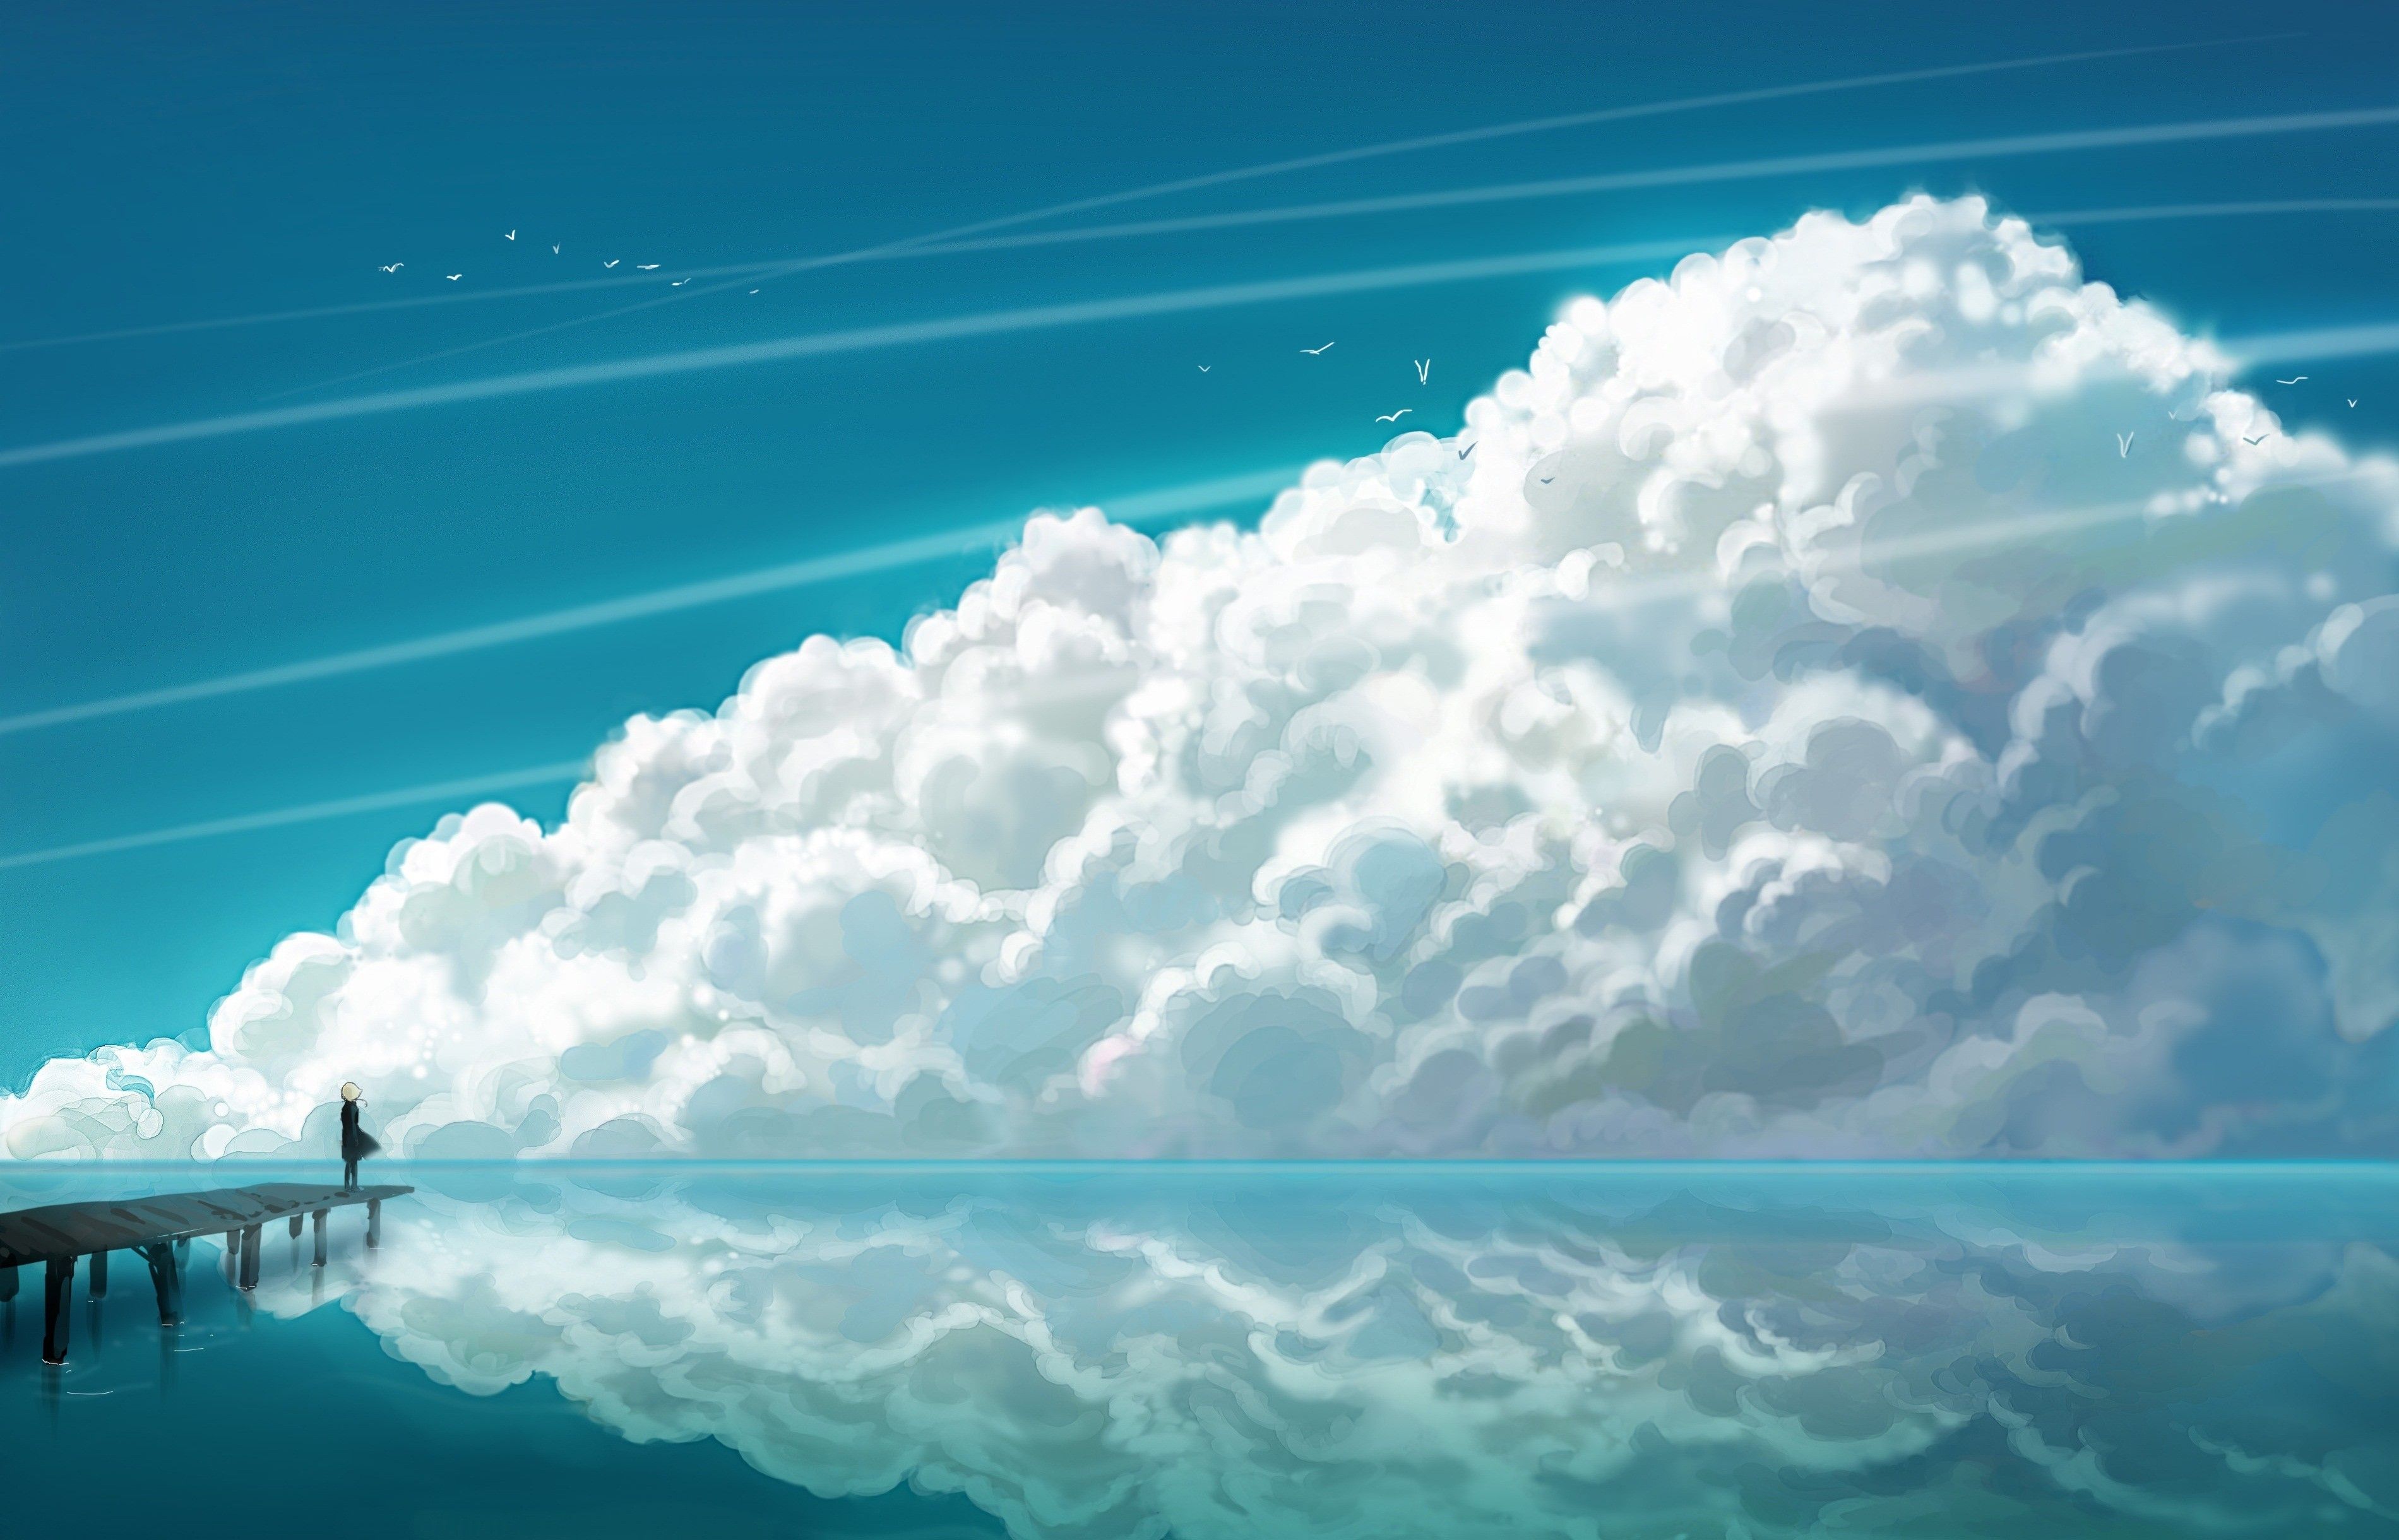 Download Anime Background 5981 3800x2440 px High Resolution